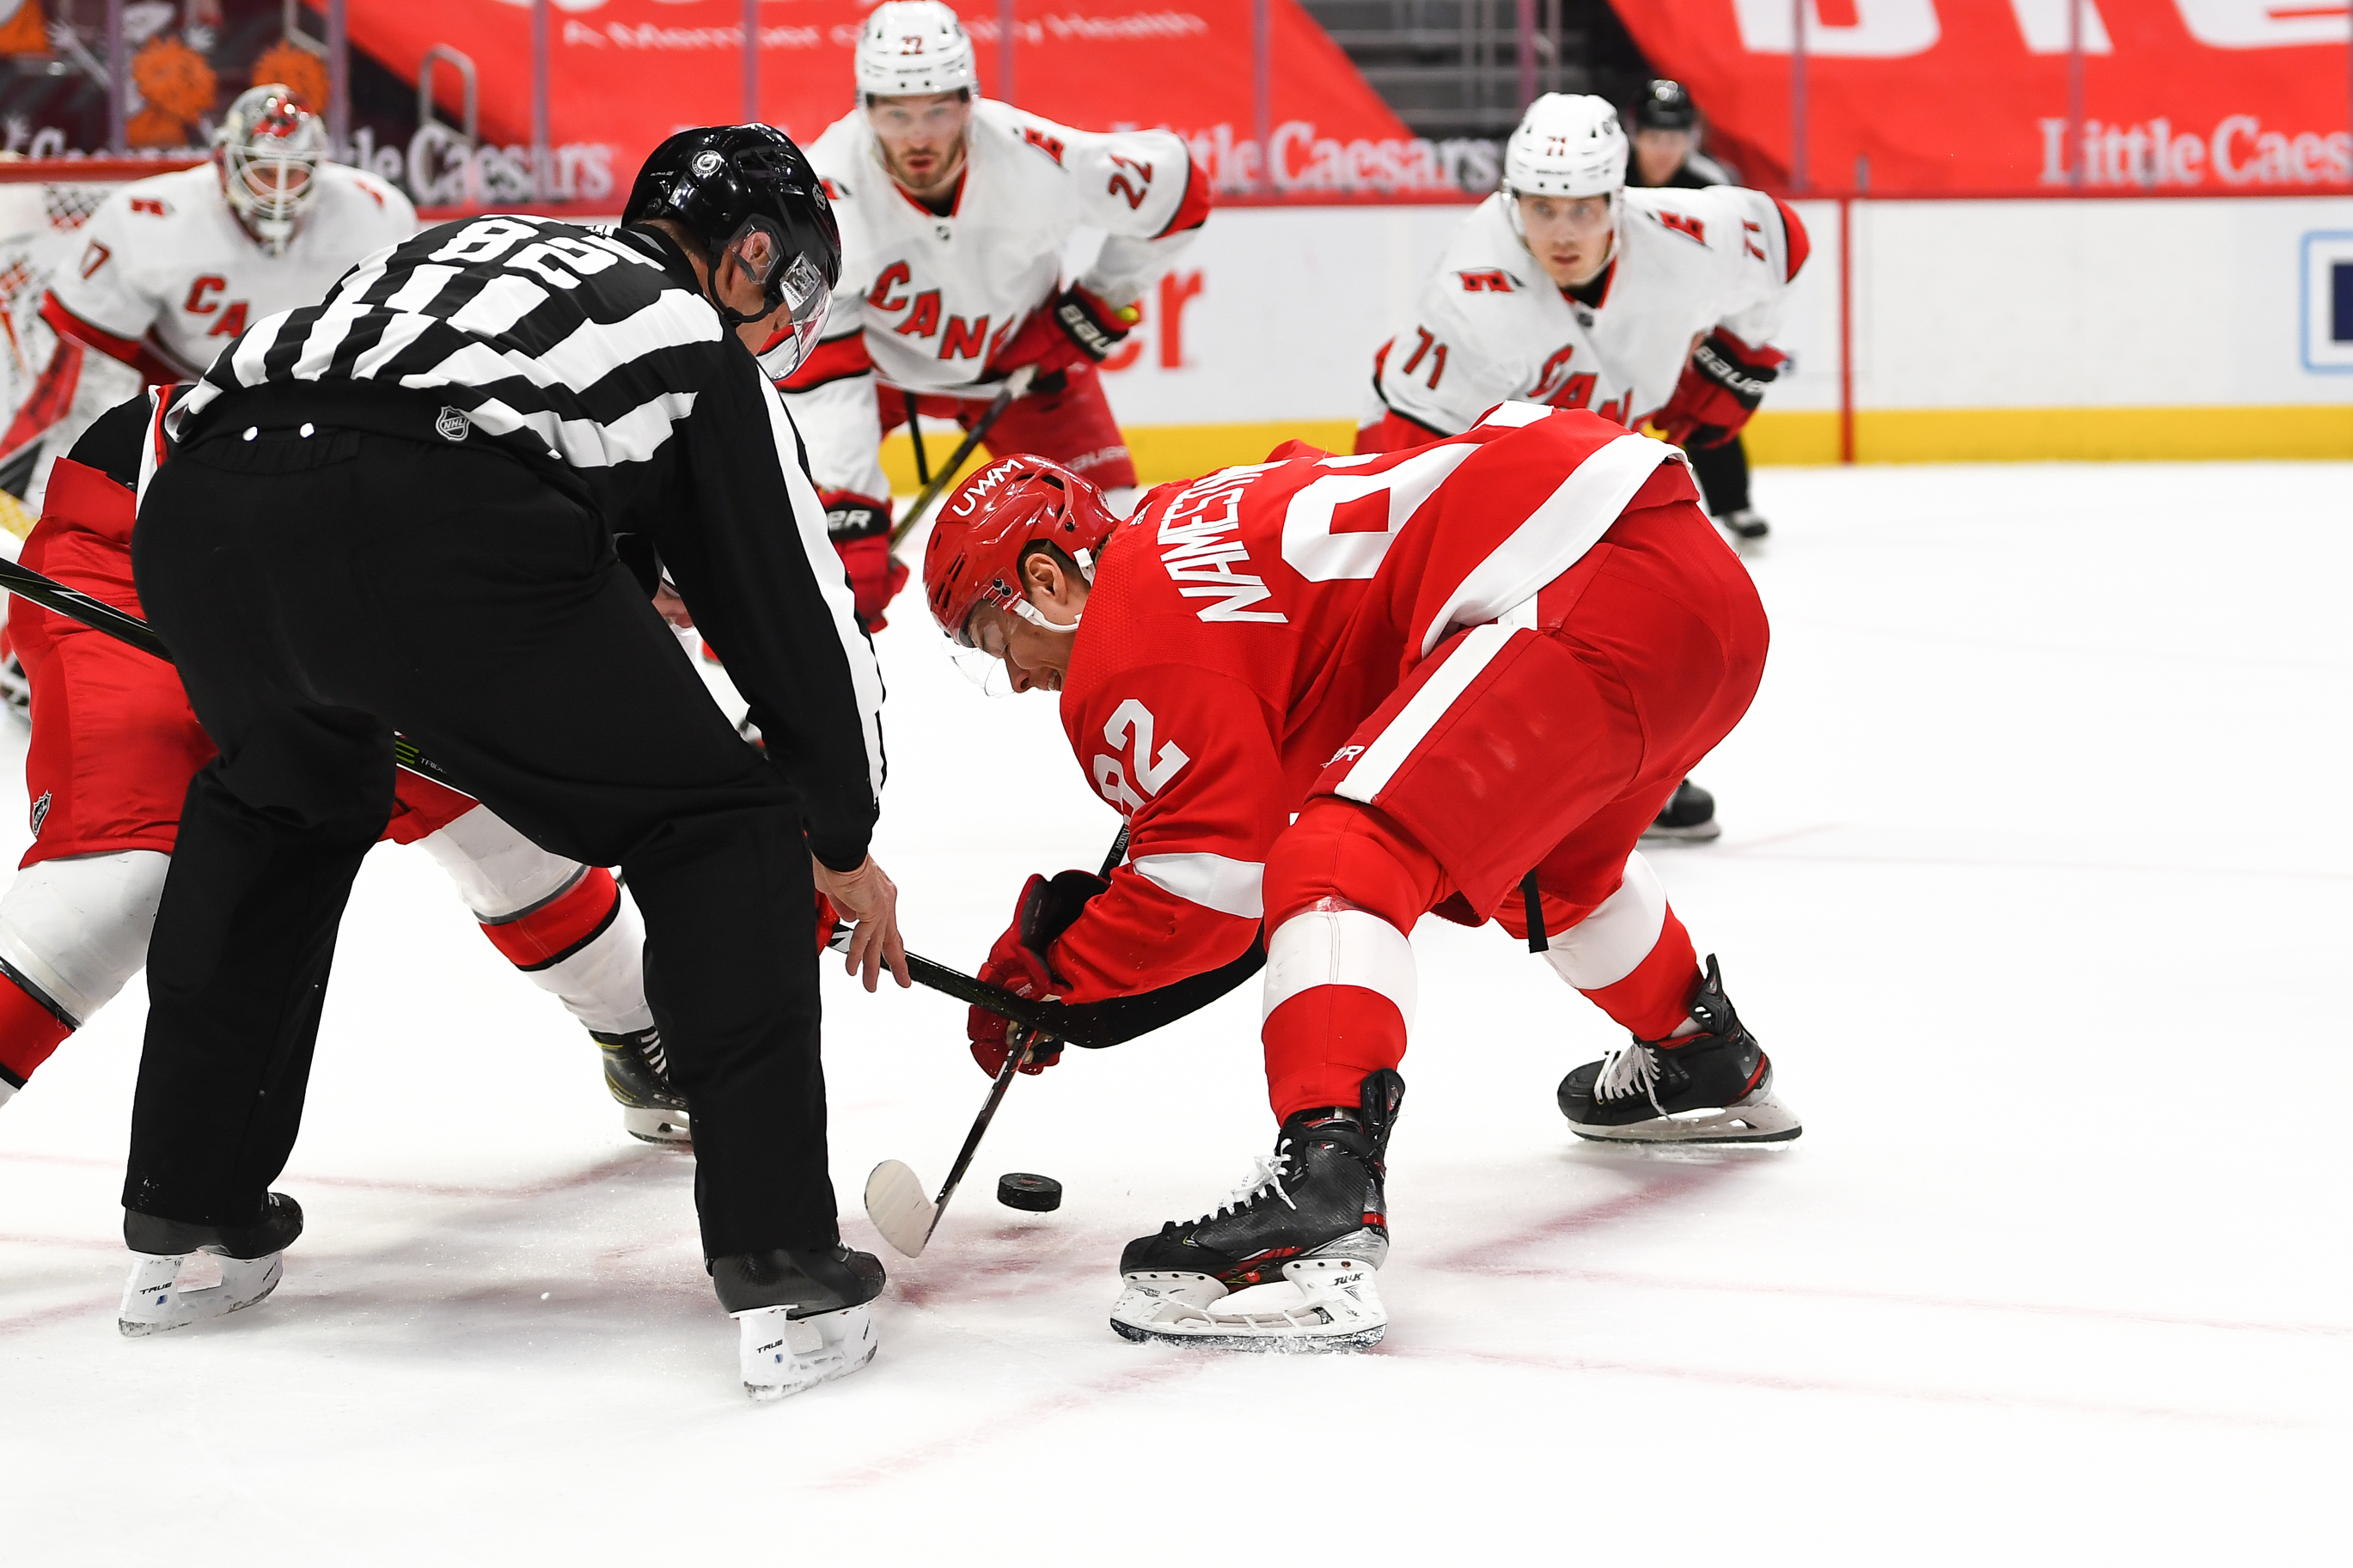 NHL: MAR 16 Hurricanes at Red Wings